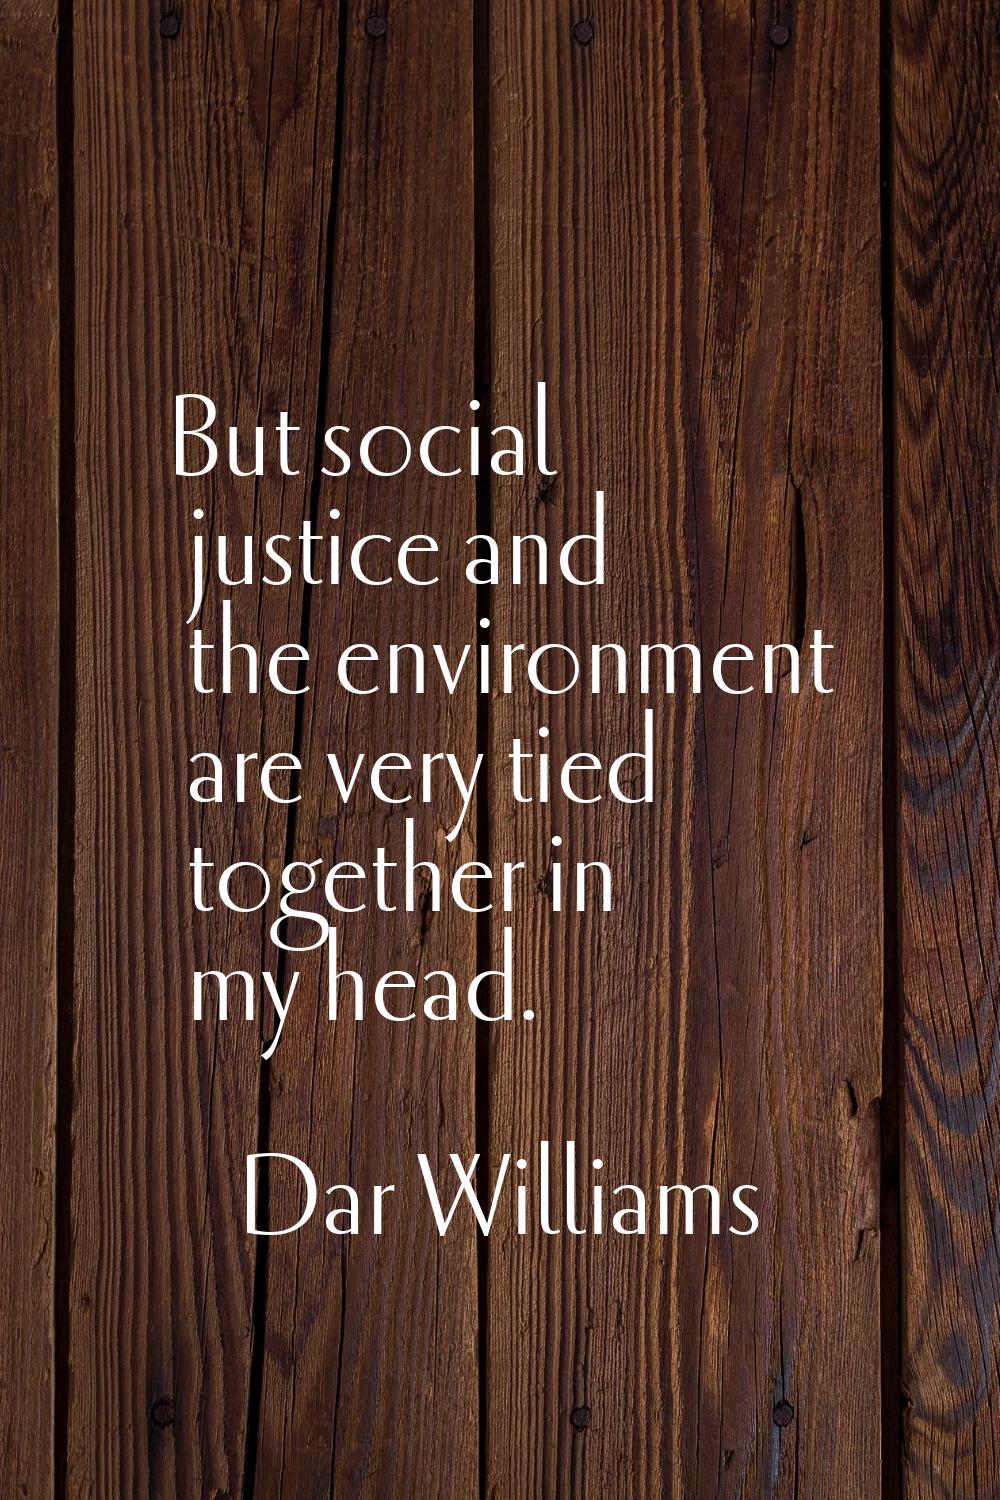 But social justice and the environment are very tied together in my head.